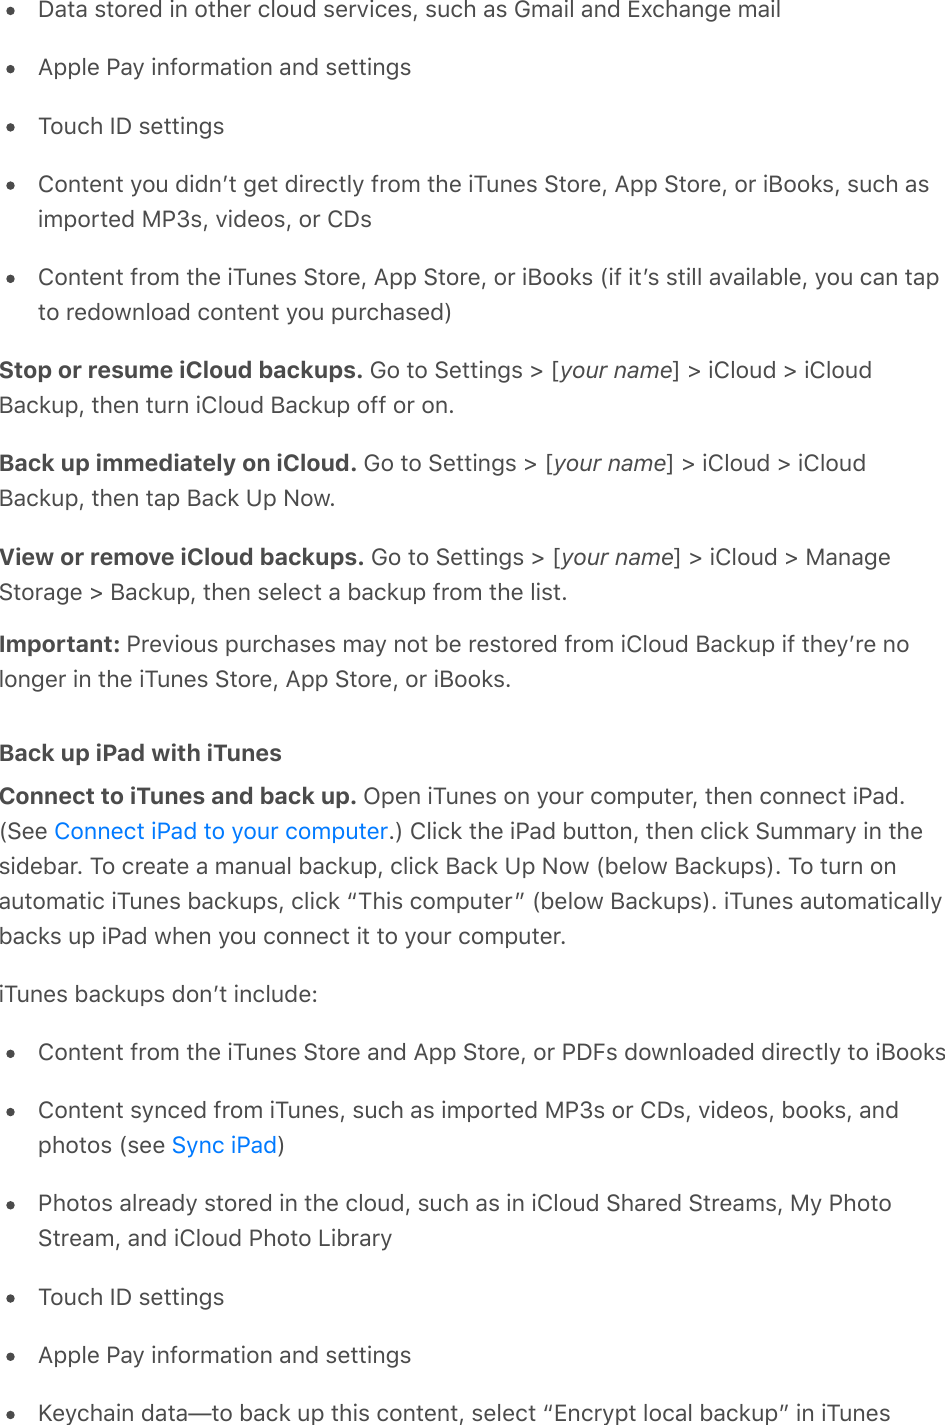 Data stored in other cloud services, such as Gmail and Exchange mailApple Pay information and settingsTouch ID settingsContent you didnʼt get directly from the iTunes Store, App Store, or iBooks, such asimported MP3s, videos, or CDsContent from the iTunes Store, App Store, or iBooks (if itʼs still available, you can tapto redownload content you purchased)Stop or resume iCloud backups. Go to Settings &gt; [your name] &gt; iCloud &gt; iCloudBackup, then turn iCloud Backup off or on.Back up immediately on iCloud. Go to Settings &gt; [your name] &gt; iCloud &gt; iCloudBackup, then tap Back Up Now.View or remove iCloud backups. Go to Settings &gt; [your name] &gt; iCloud &gt; ManageStorage &gt; Backup, then select a backup from the list.Important: Previous purchases may not be restored from iCloud Backup if theyʼre nolonger in the iTunes Store, App Store, or iBooks.Back up iPad with iTunesConnect to iTunes and back up. Open iTunes on your computer, then connect iPad.(See  .) Click the iPad button, then click Summary in thesidebar. To create a manual backup, click Back Up Now (below Backups). To turn onautomatic iTunes backups, click “This computer” (below Backups). iTunes automaticallybacks up iPad when you connect it to your computer.iTunes backups donʼt include:Content from the iTunes Store and App Store, or PDFs downloaded directly to iBooksContent synced from iTunes, such as imported MP3s or CDs, videos, books, andphotos (see  )Photos already stored in the cloud, such as in iCloud Shared Streams, My PhotoStream, and iCloud Photo LibraryTouch ID settingsApple Pay information and settingsKeychain data—to back up this content, select “Encrypt local backup” in iTunesConnect iPad to your computerSync iPad